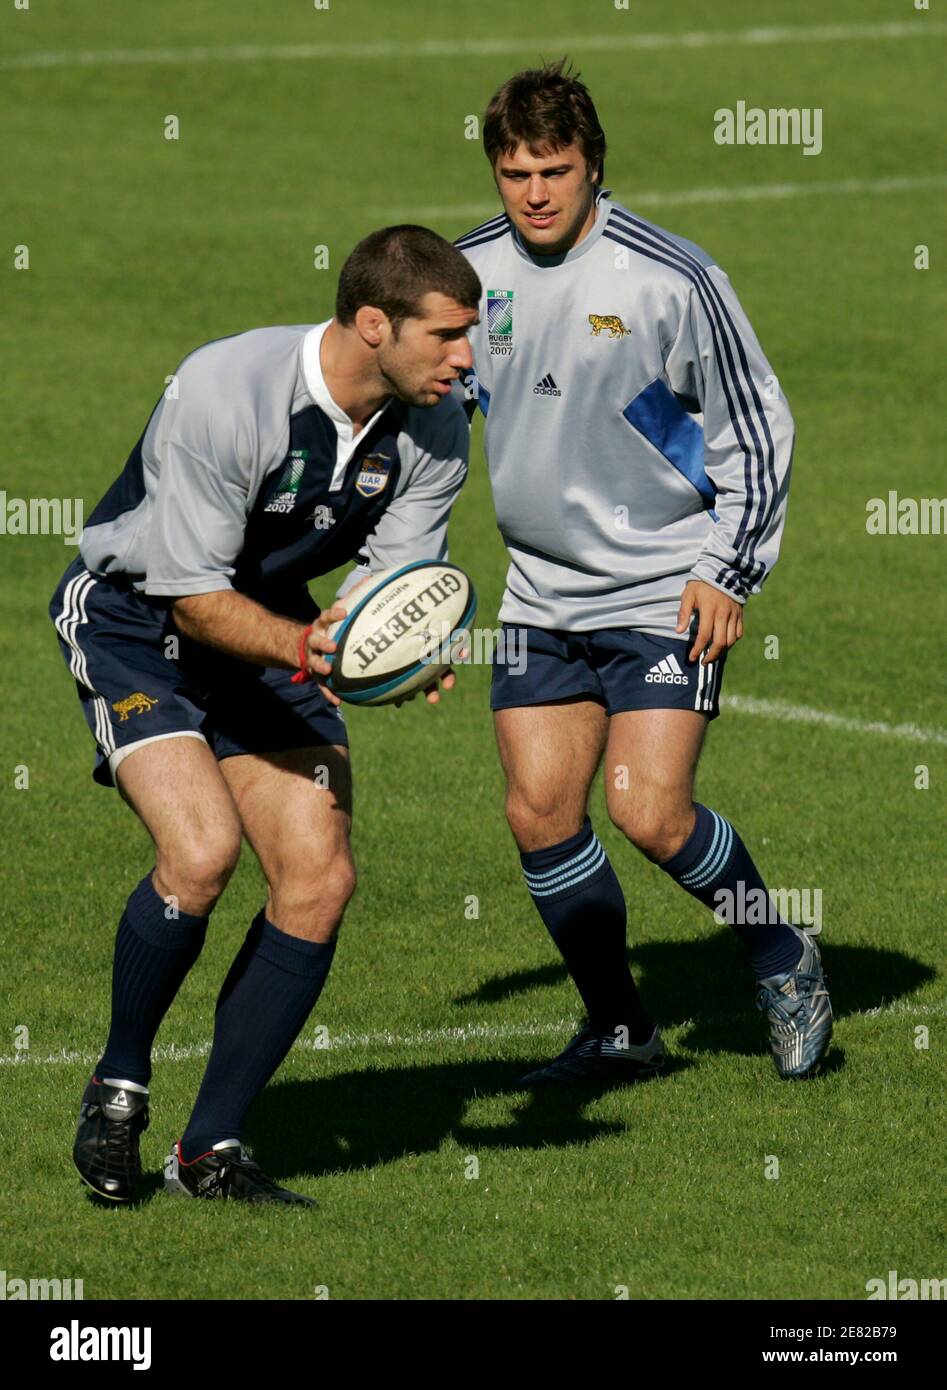 Lucas Ostiglia (L) and Federico Serra of Argentina's national rugby team Los  Pumas practice during a training session in Montmorency in preparation for  the upcoming Rugby World Cup in France September 4,